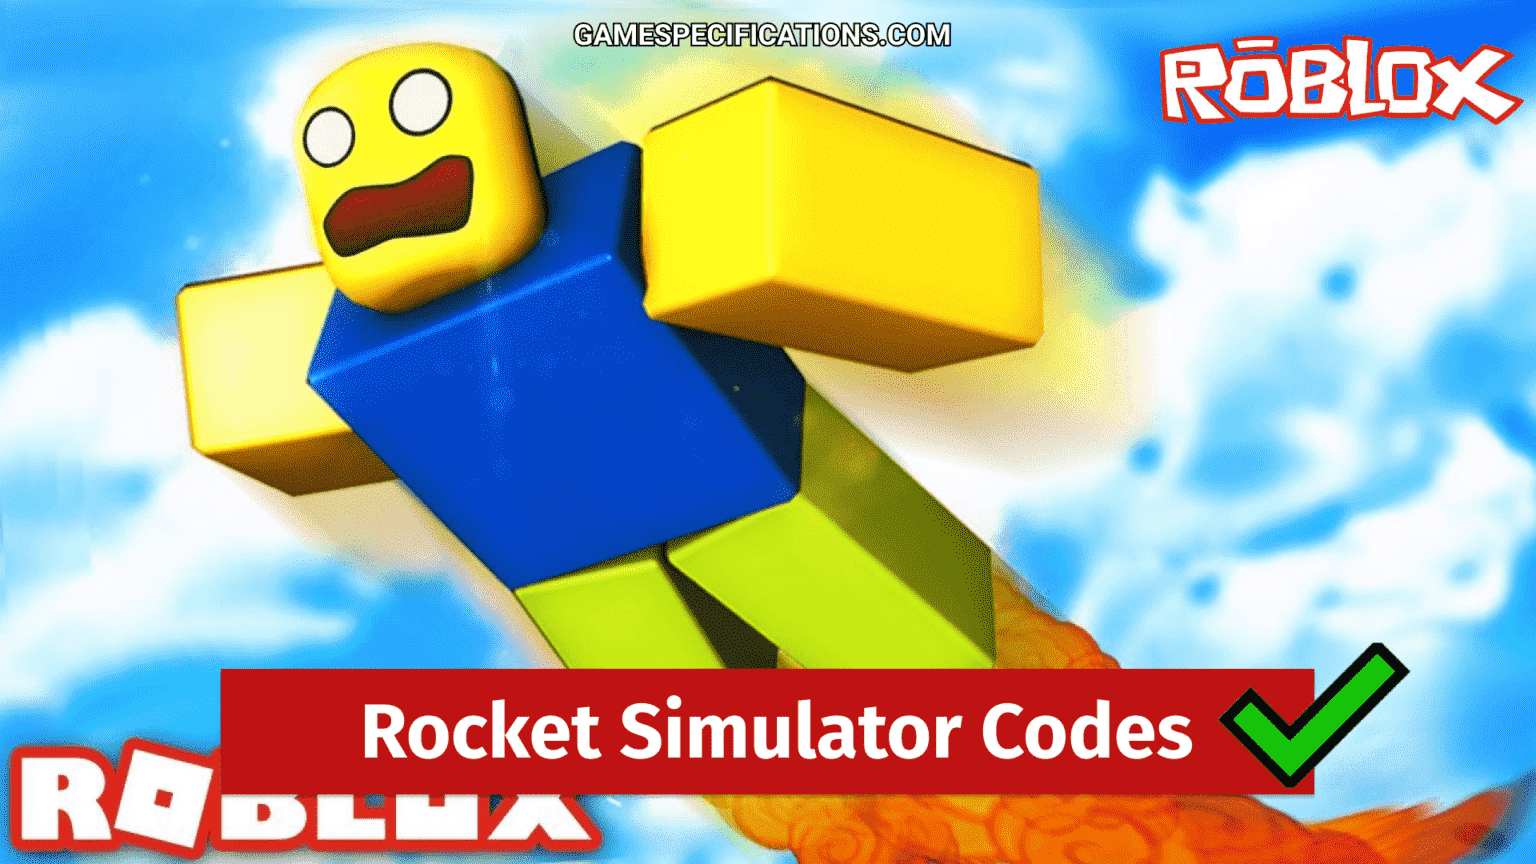 Roblox Rocket Simulator Codes August 2022 Game Specifications